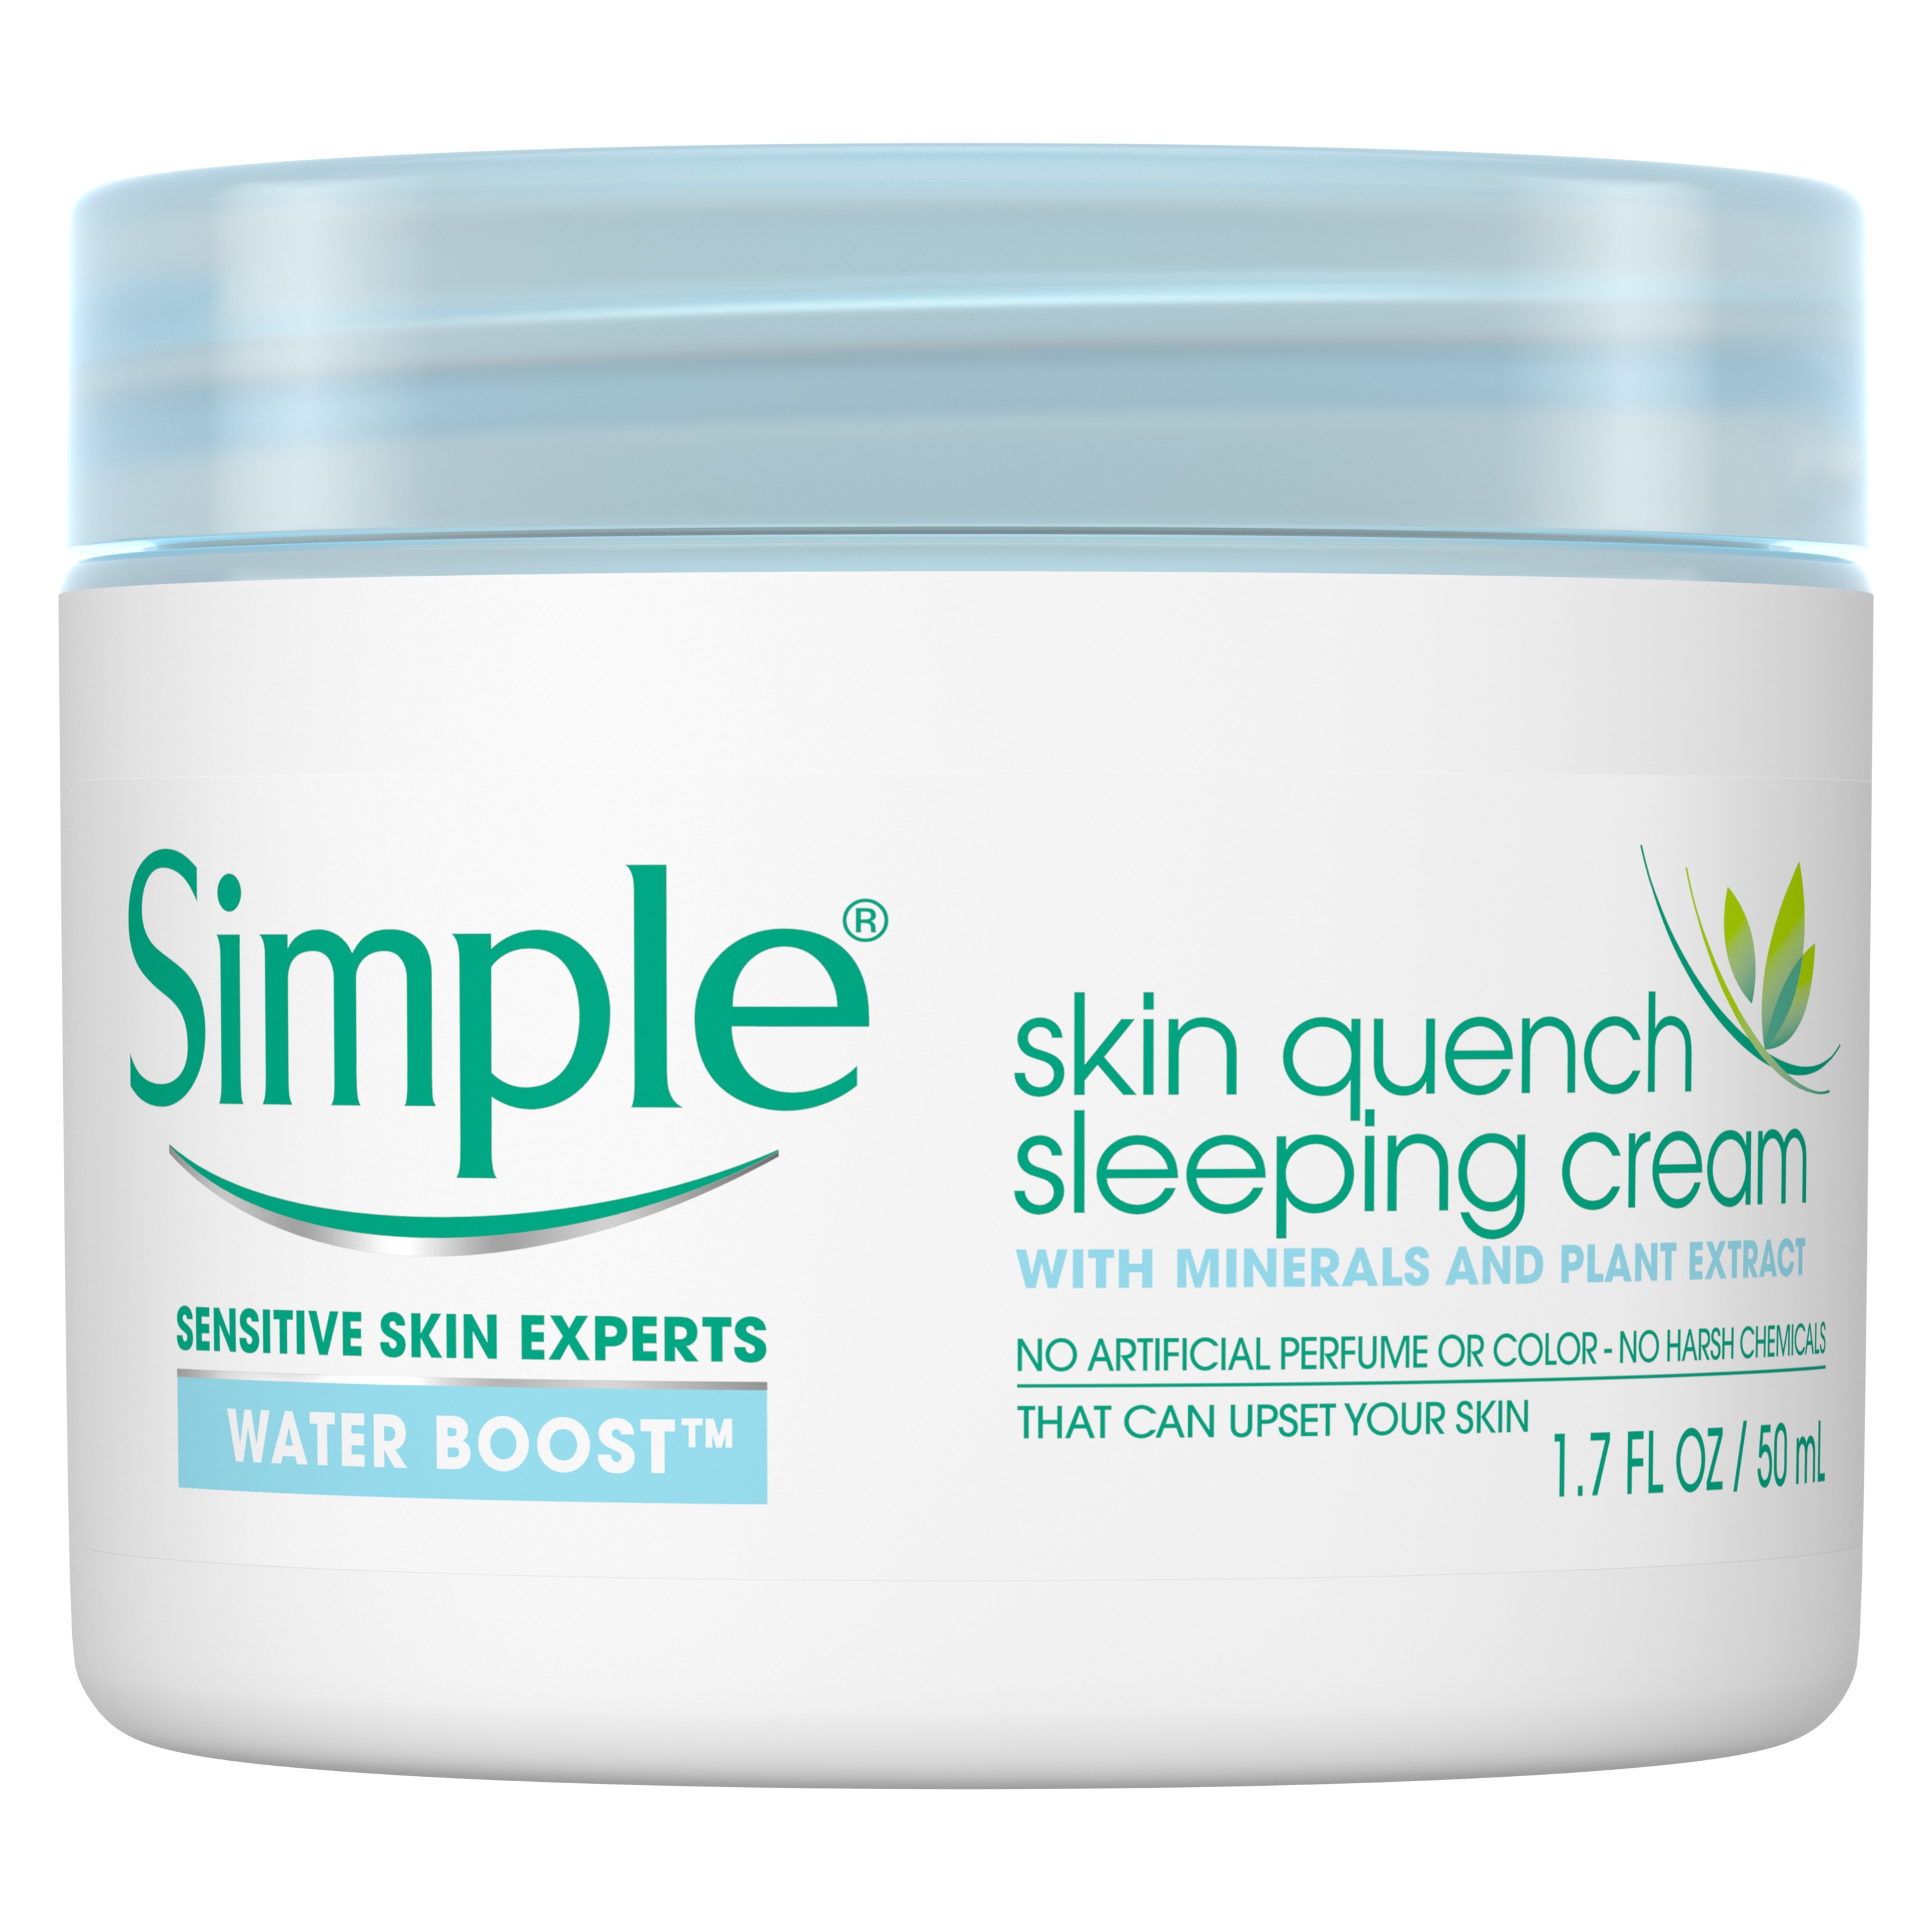 Simple Water Boost Skin Quench Sleeping Cream 1.7 oz - image 4 of 13